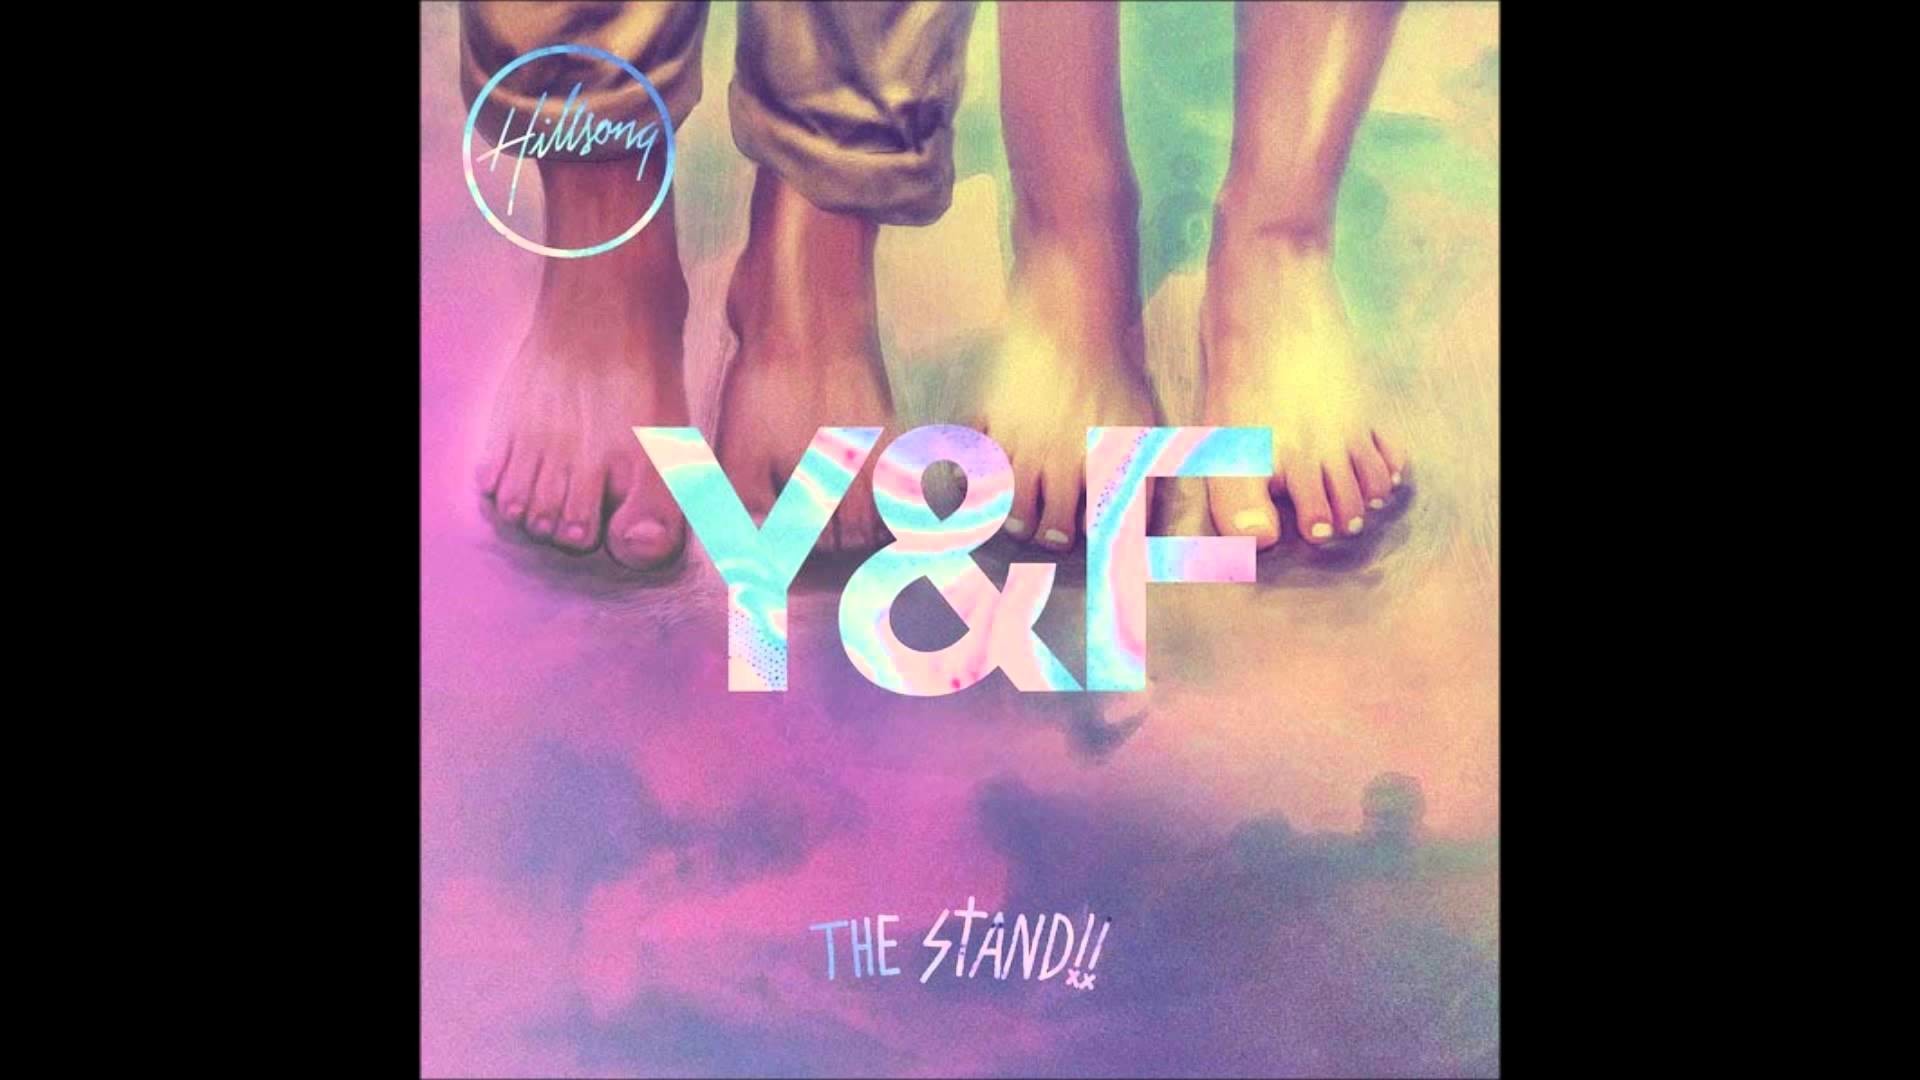 1920x1080 Hillsong Young & Free -- The Stand - YouTube